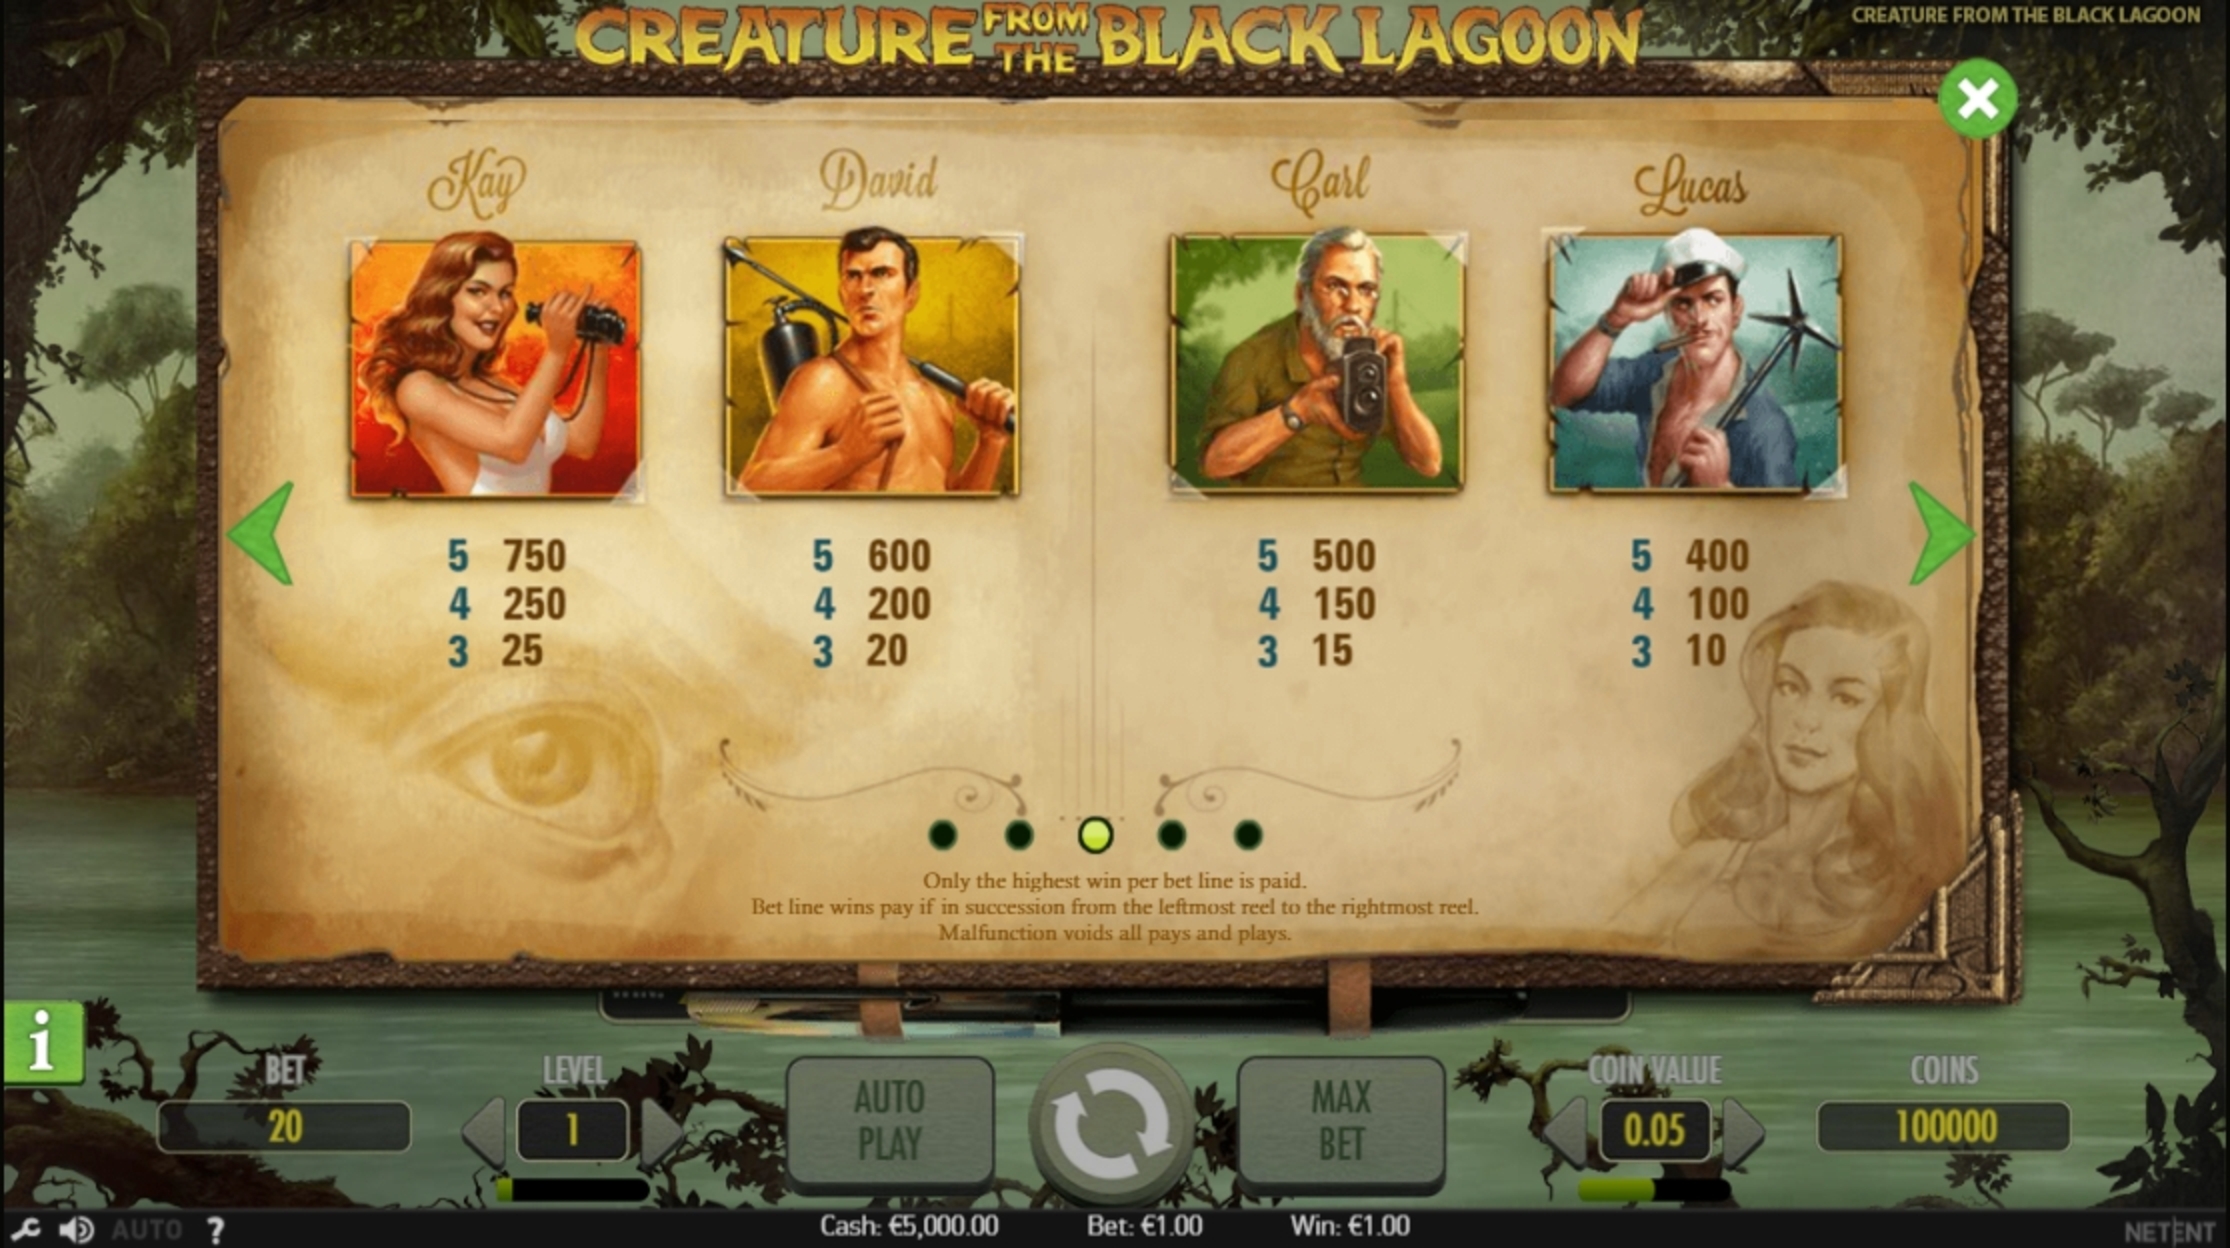 Info of Creature from the Black Lagoon Slot Game by NetEnt